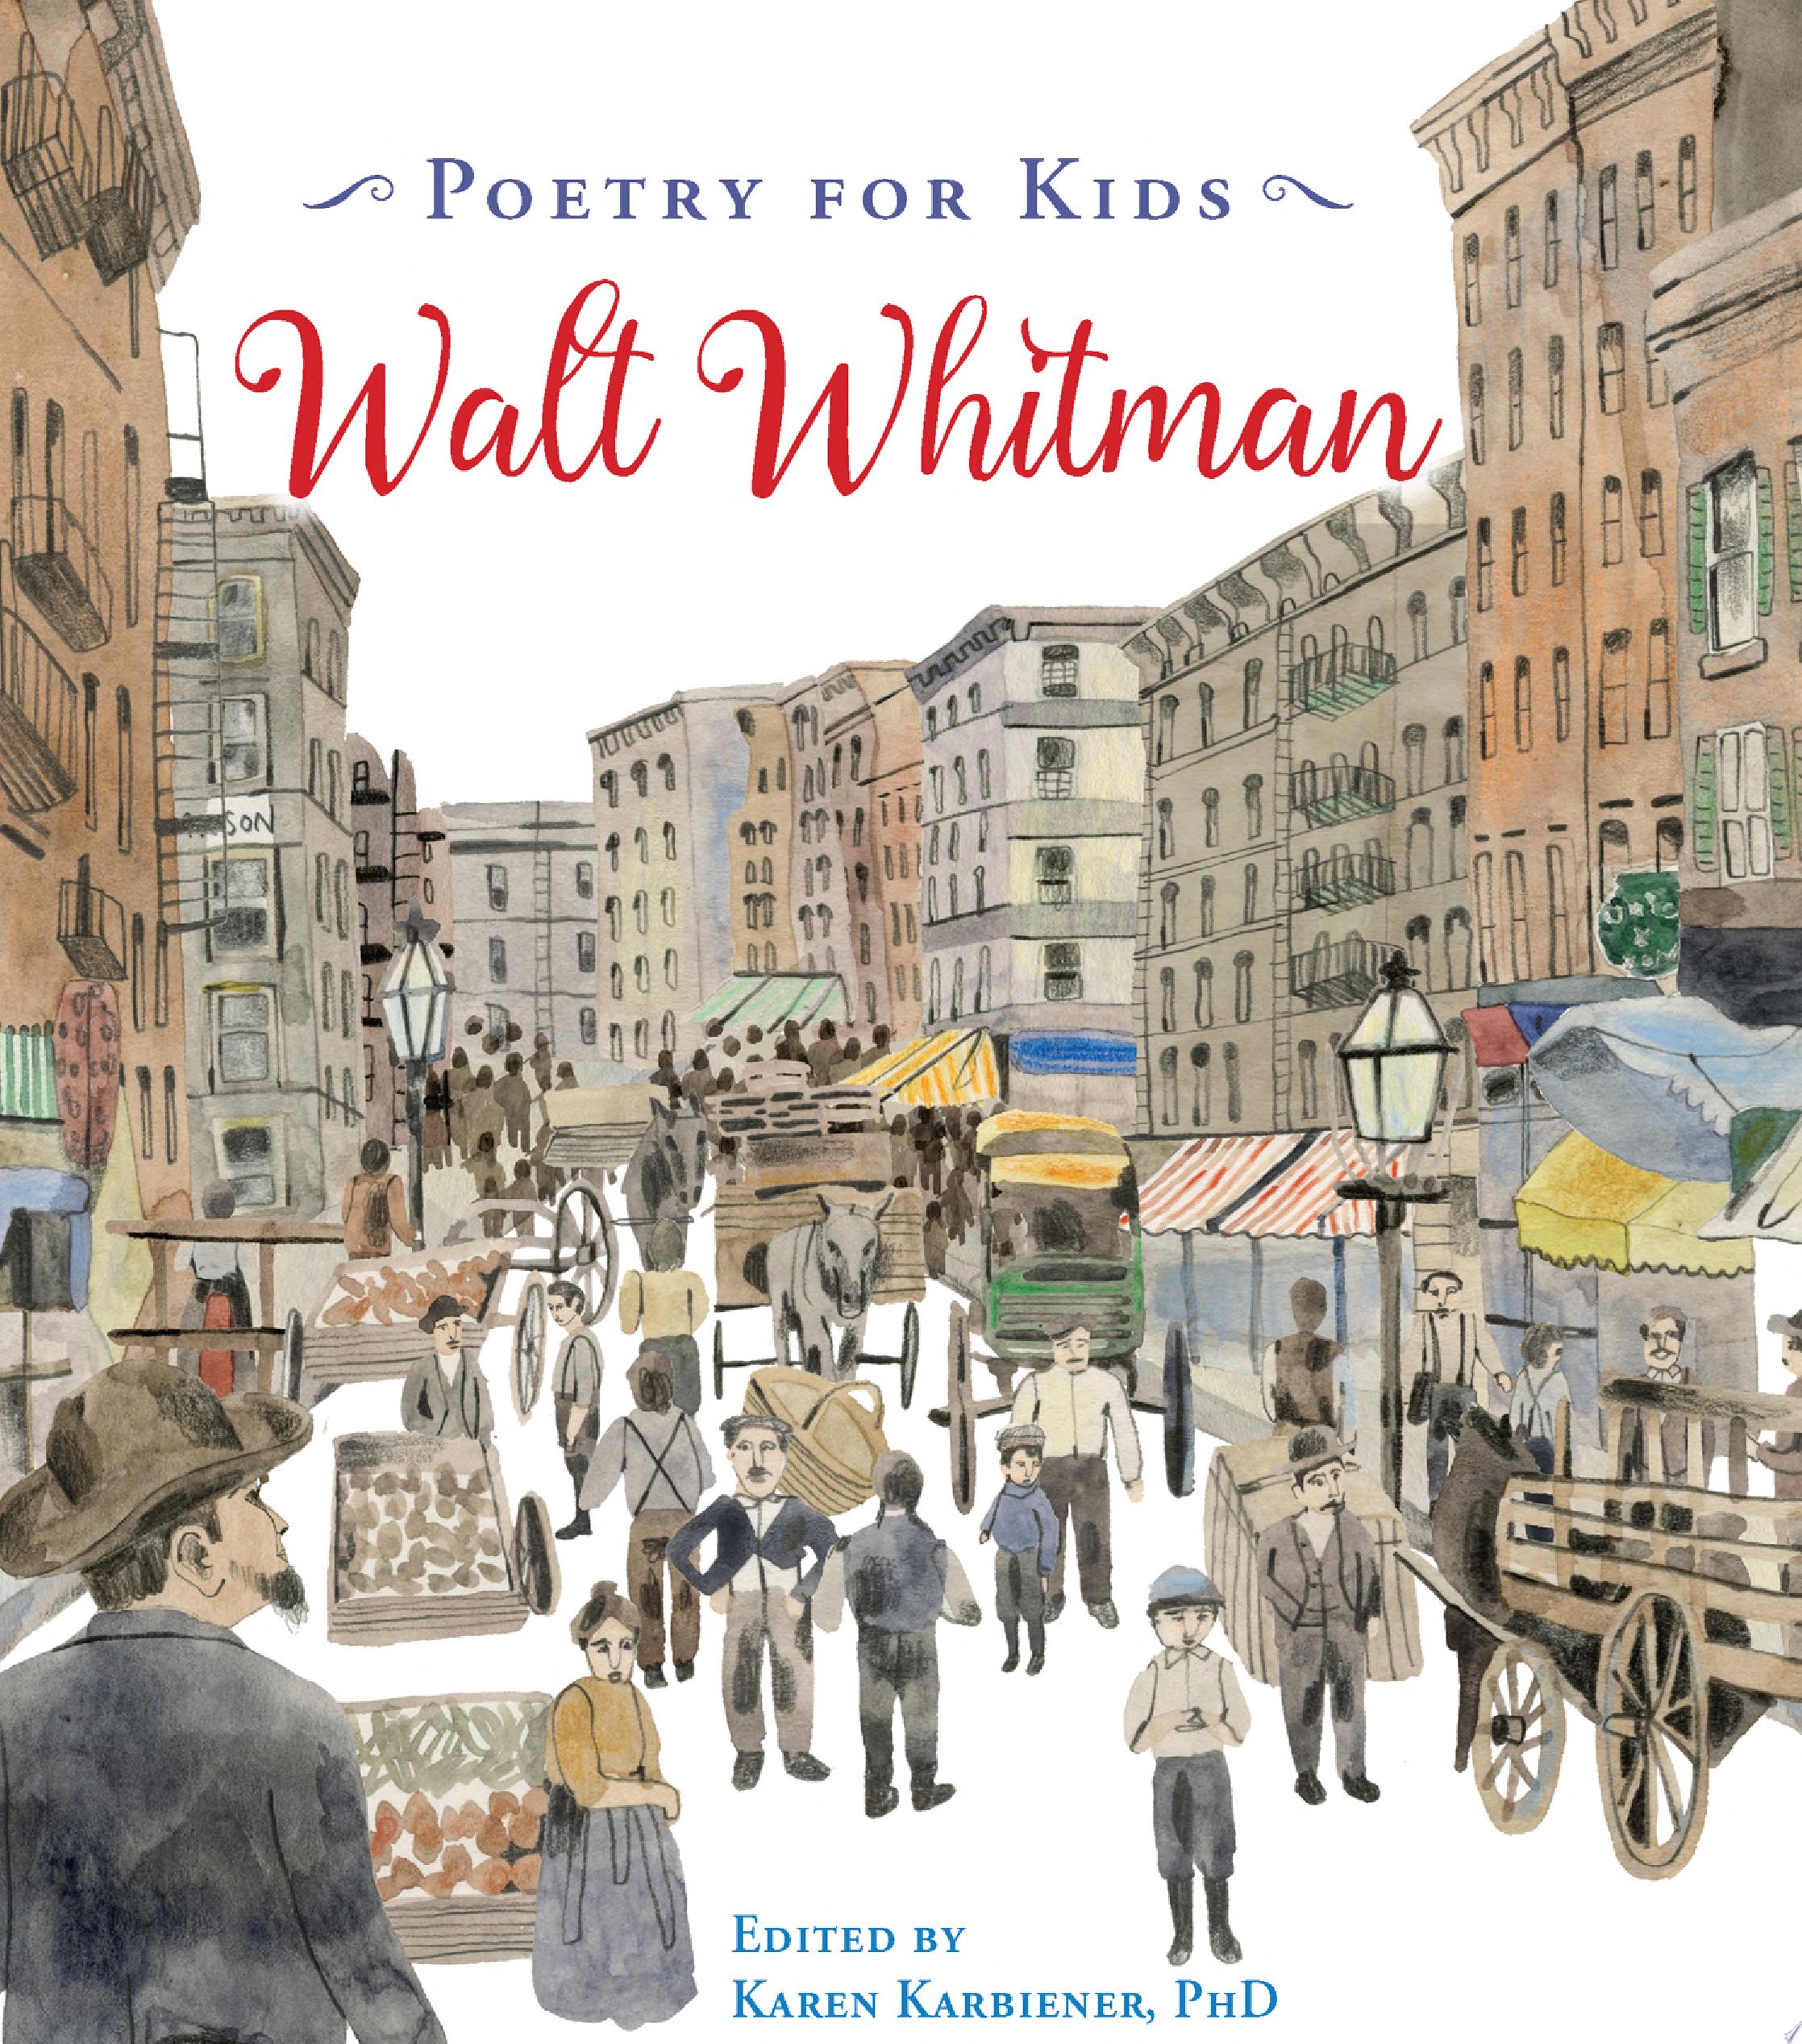 Image for "Poetry for Kids: Walt Whitman"